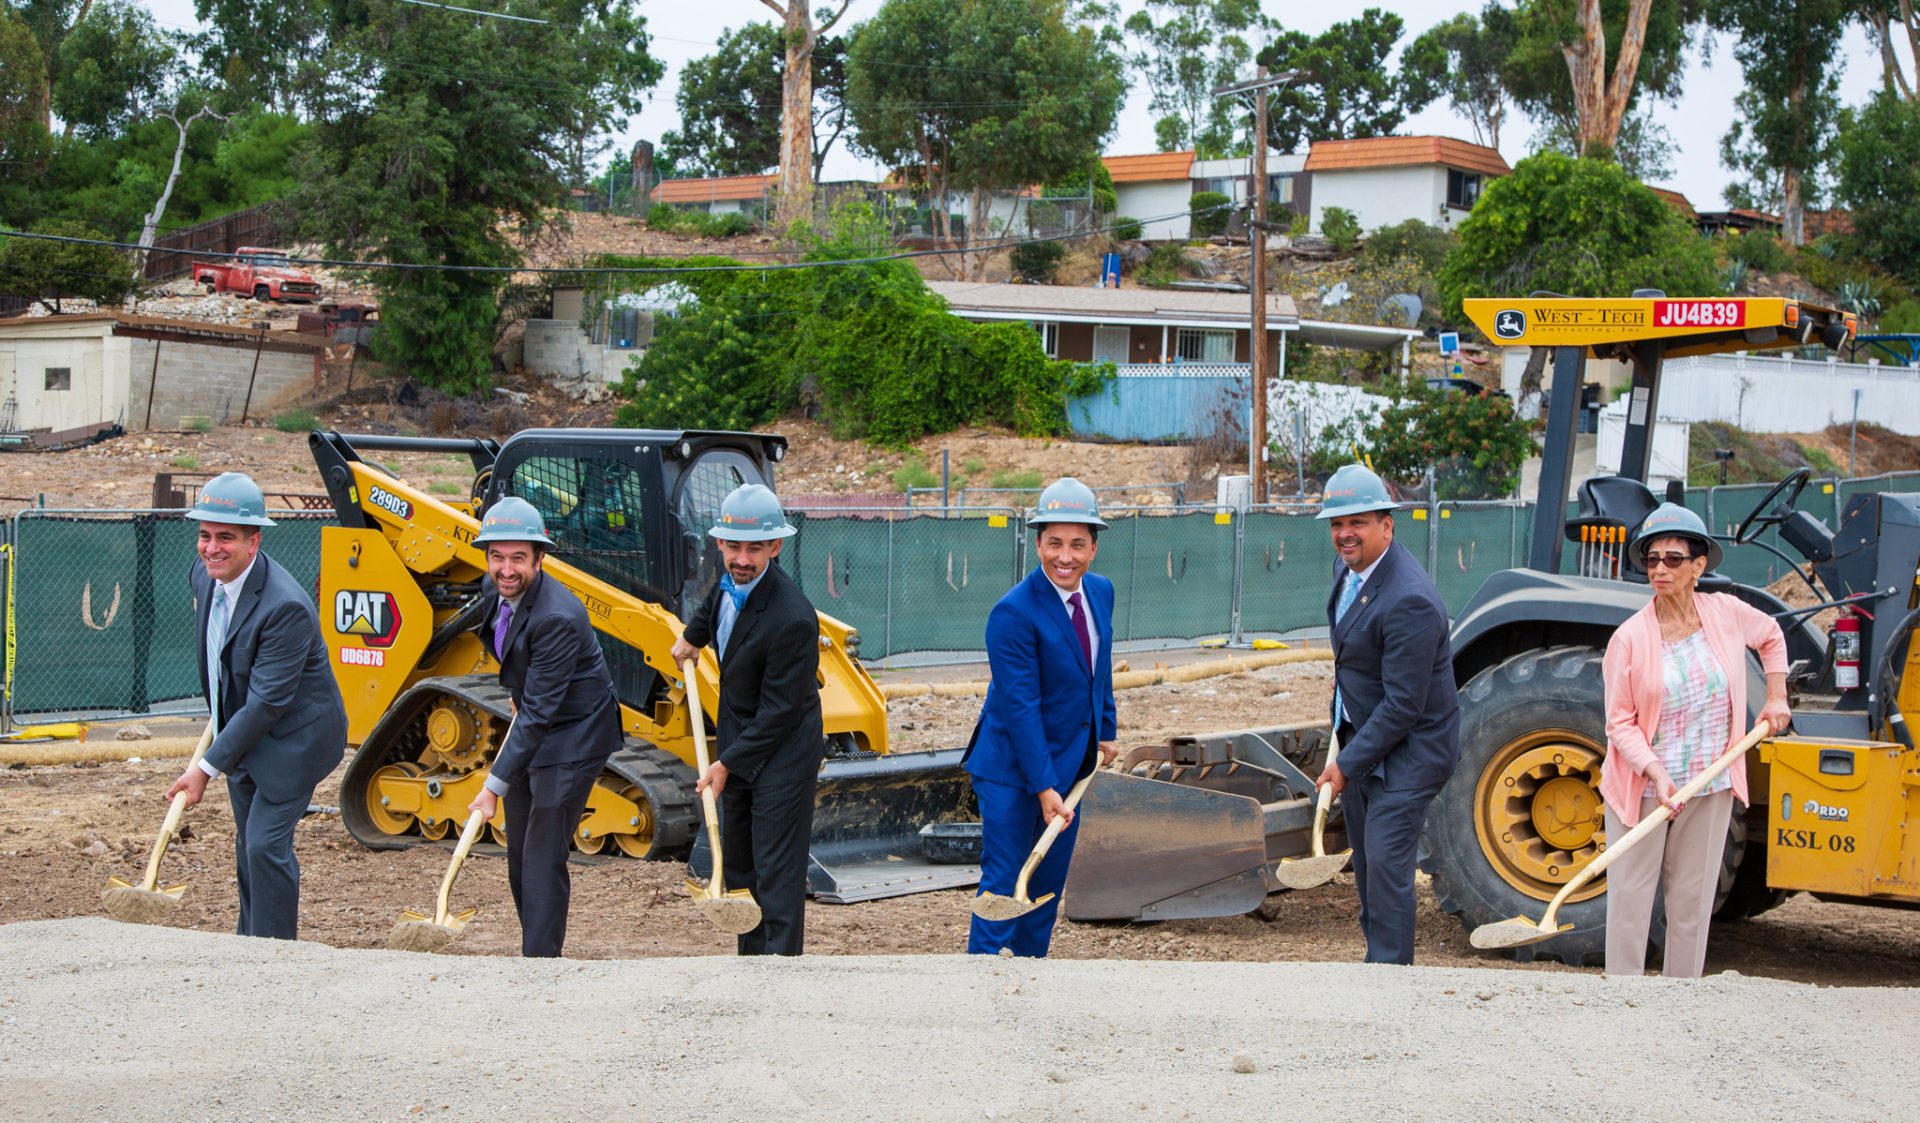 Development of 100 Apartments for Seniors with Low Income Breaks Ground in San Ysidro